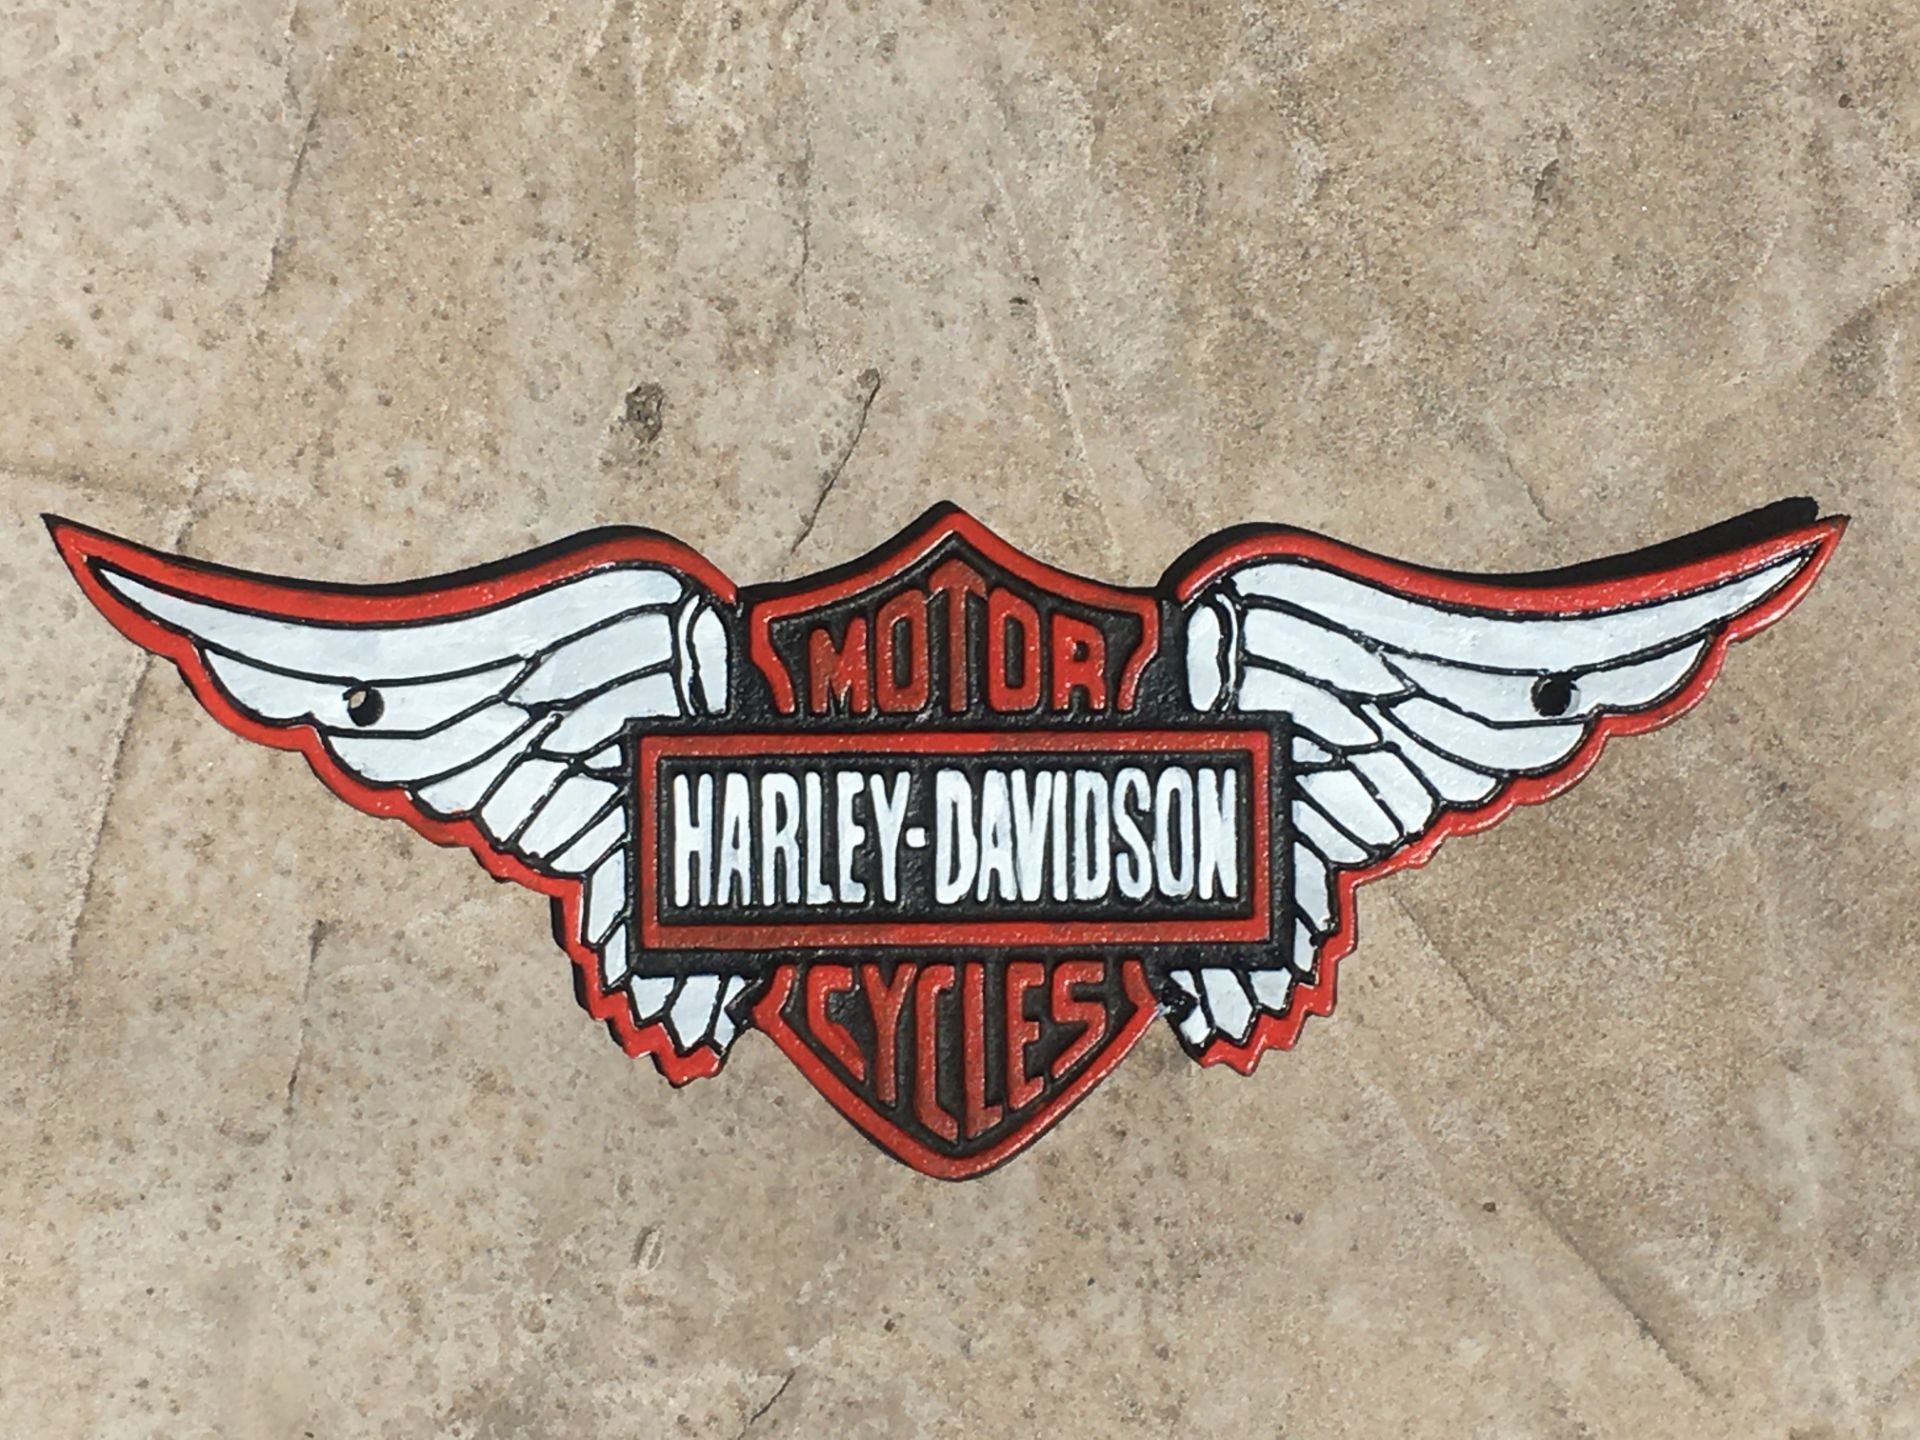 Collection Of Harley Davidson Cast Iron Signs - Image 7 of 16